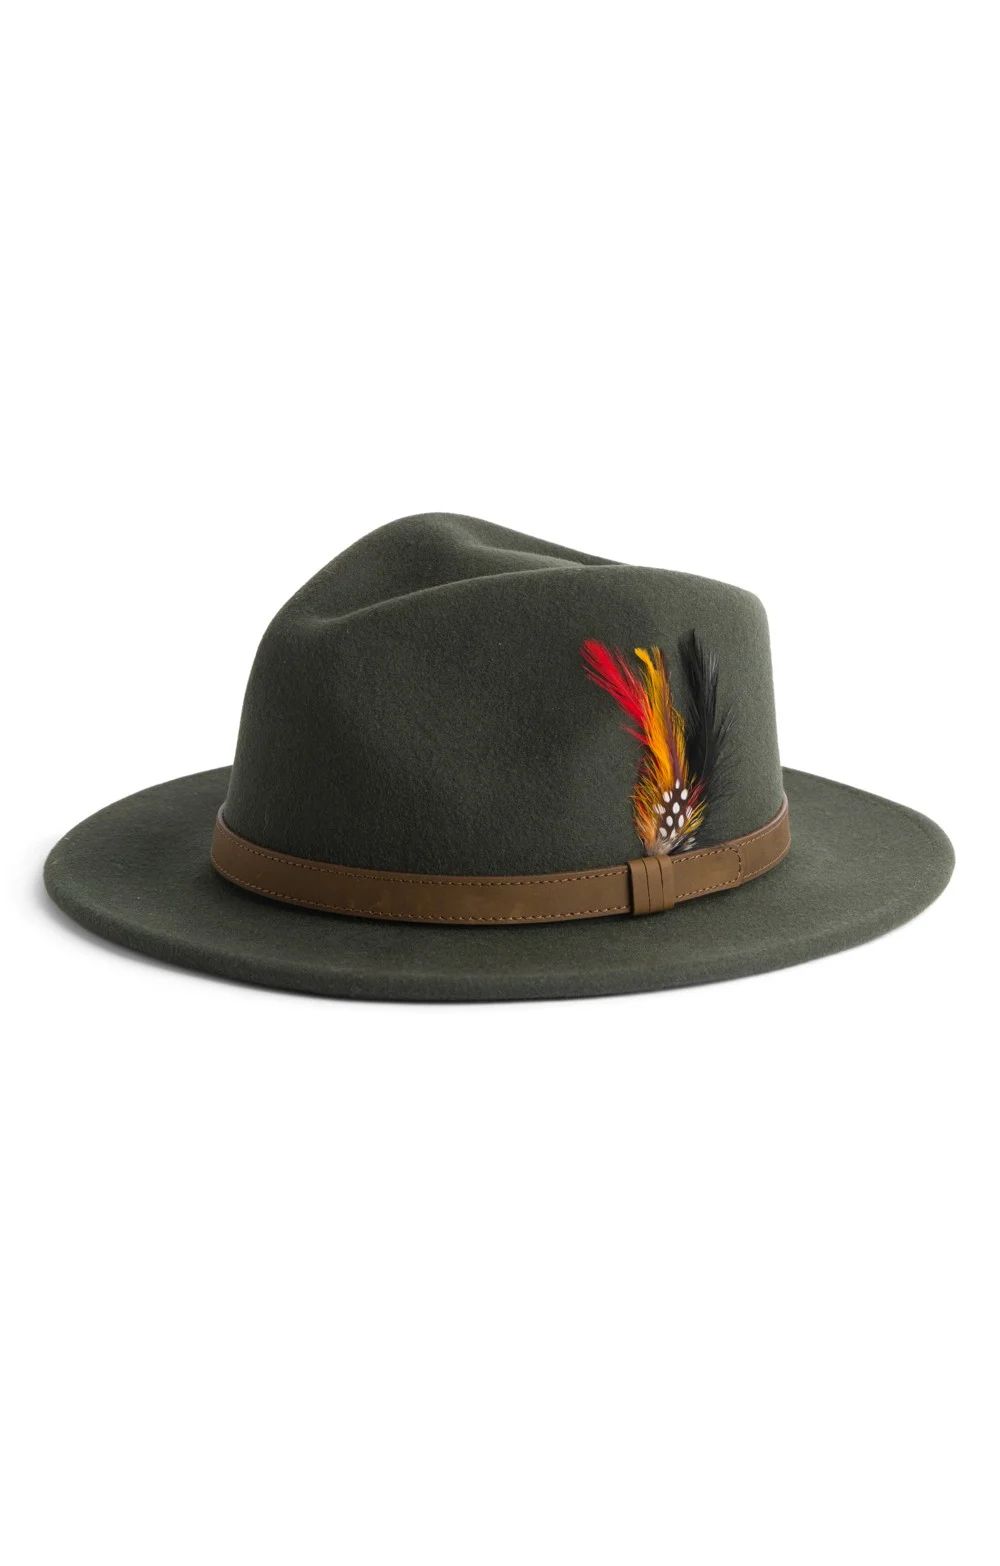 Ladies Felt Fedora with Removable Feather | The House Of Bruar